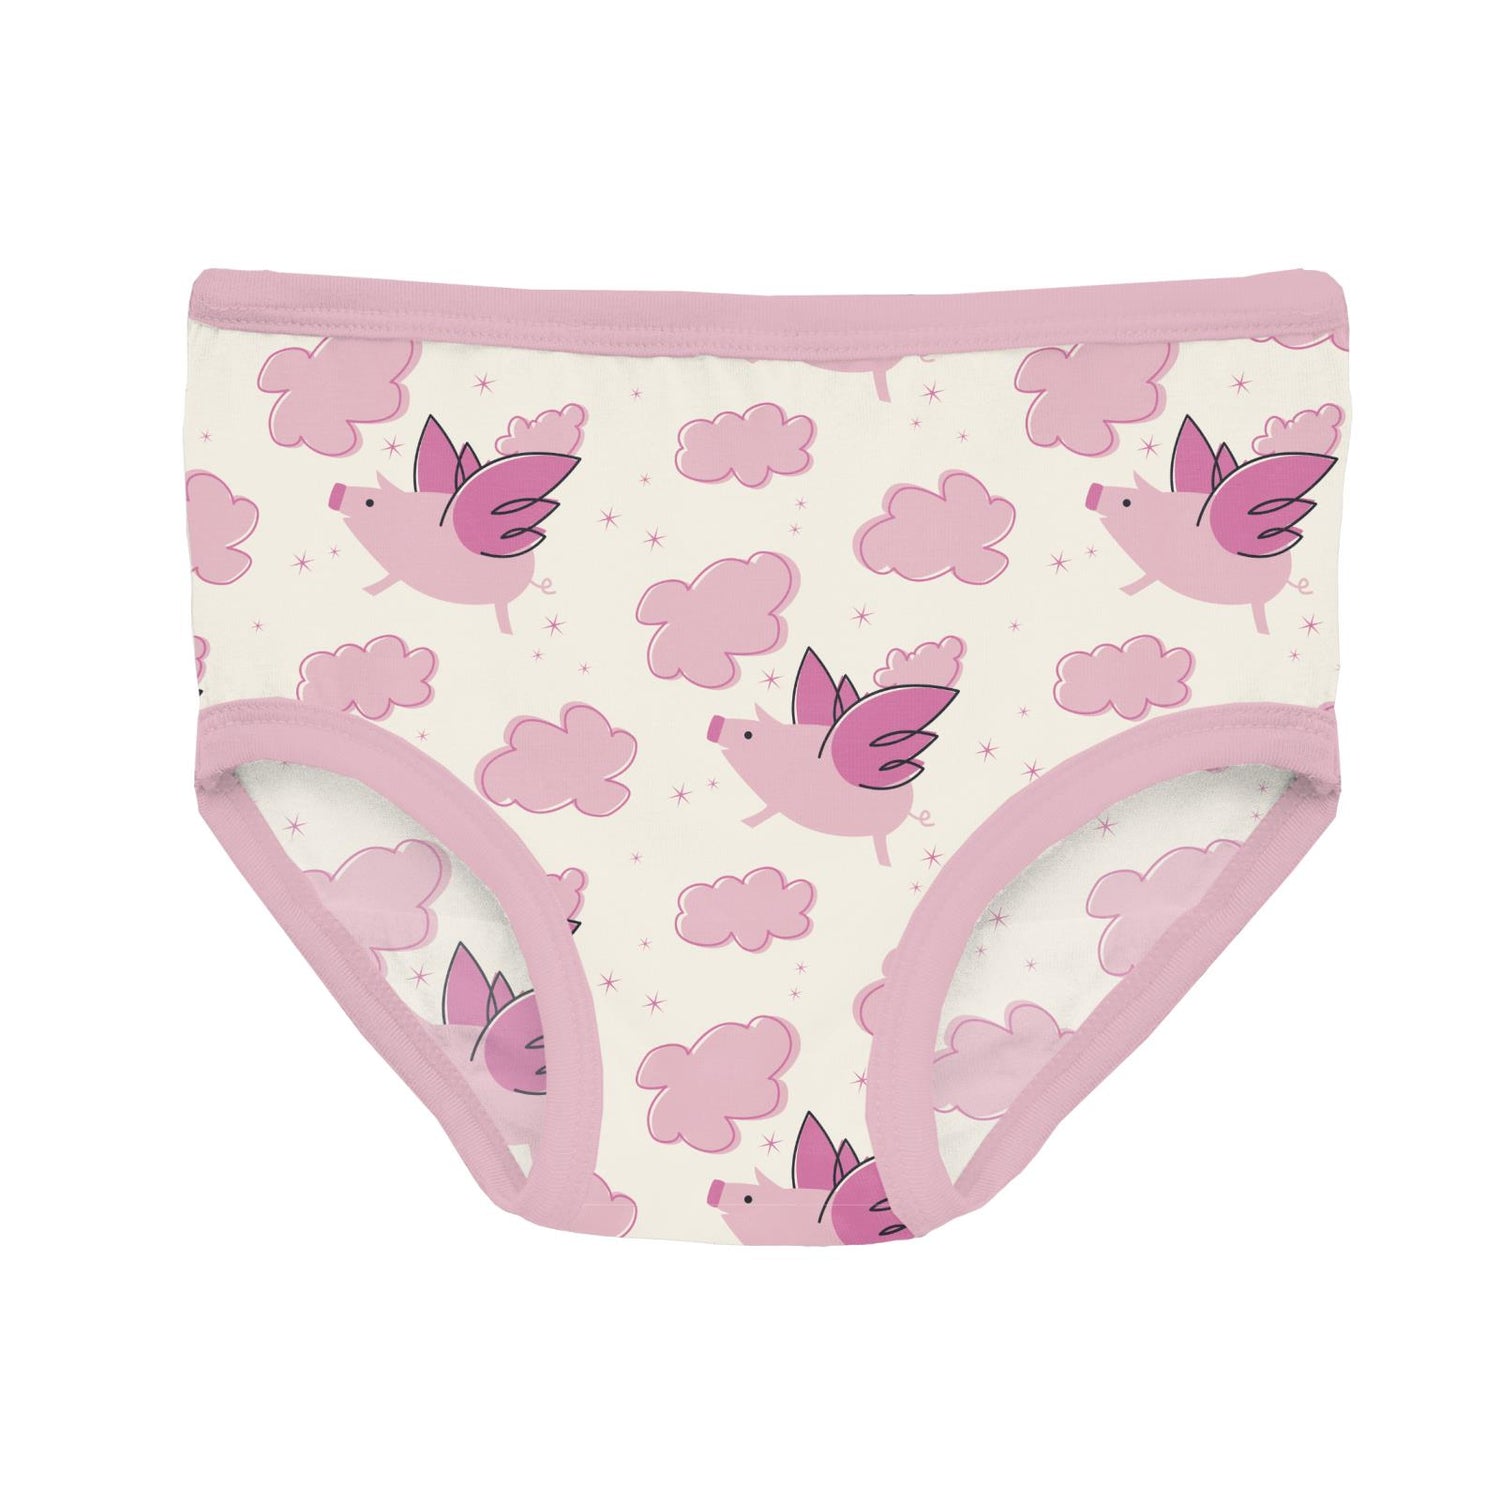 Print Girl's Underwear Set of 3 in Natural Flying Pigs, Natural & Cake Pop Baby Bumblebee